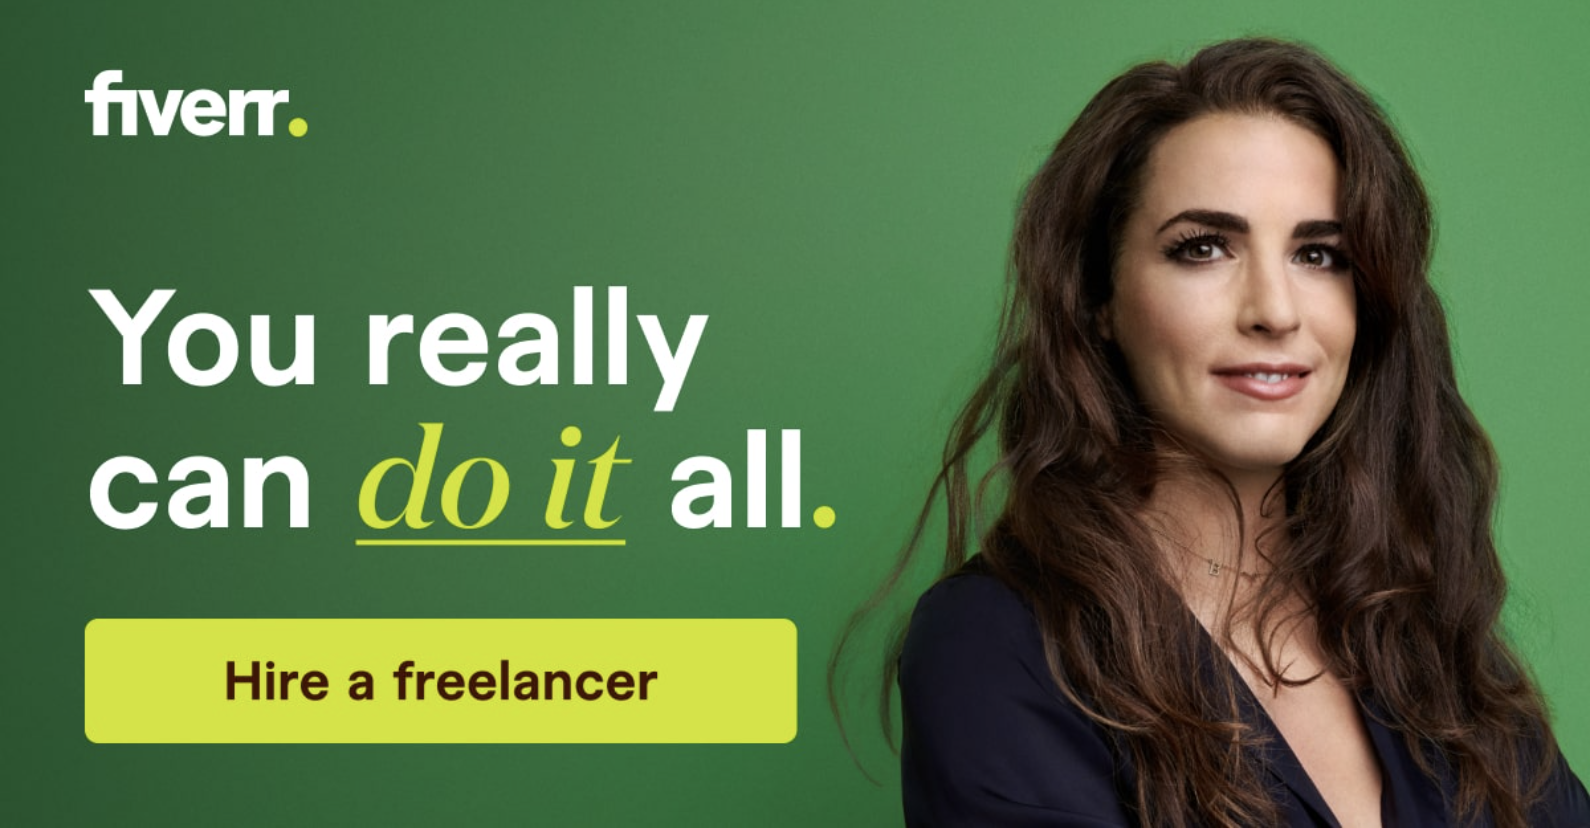 Fiverr V. Well Found – Freelance Platform Comparison For Buyers And Sellers